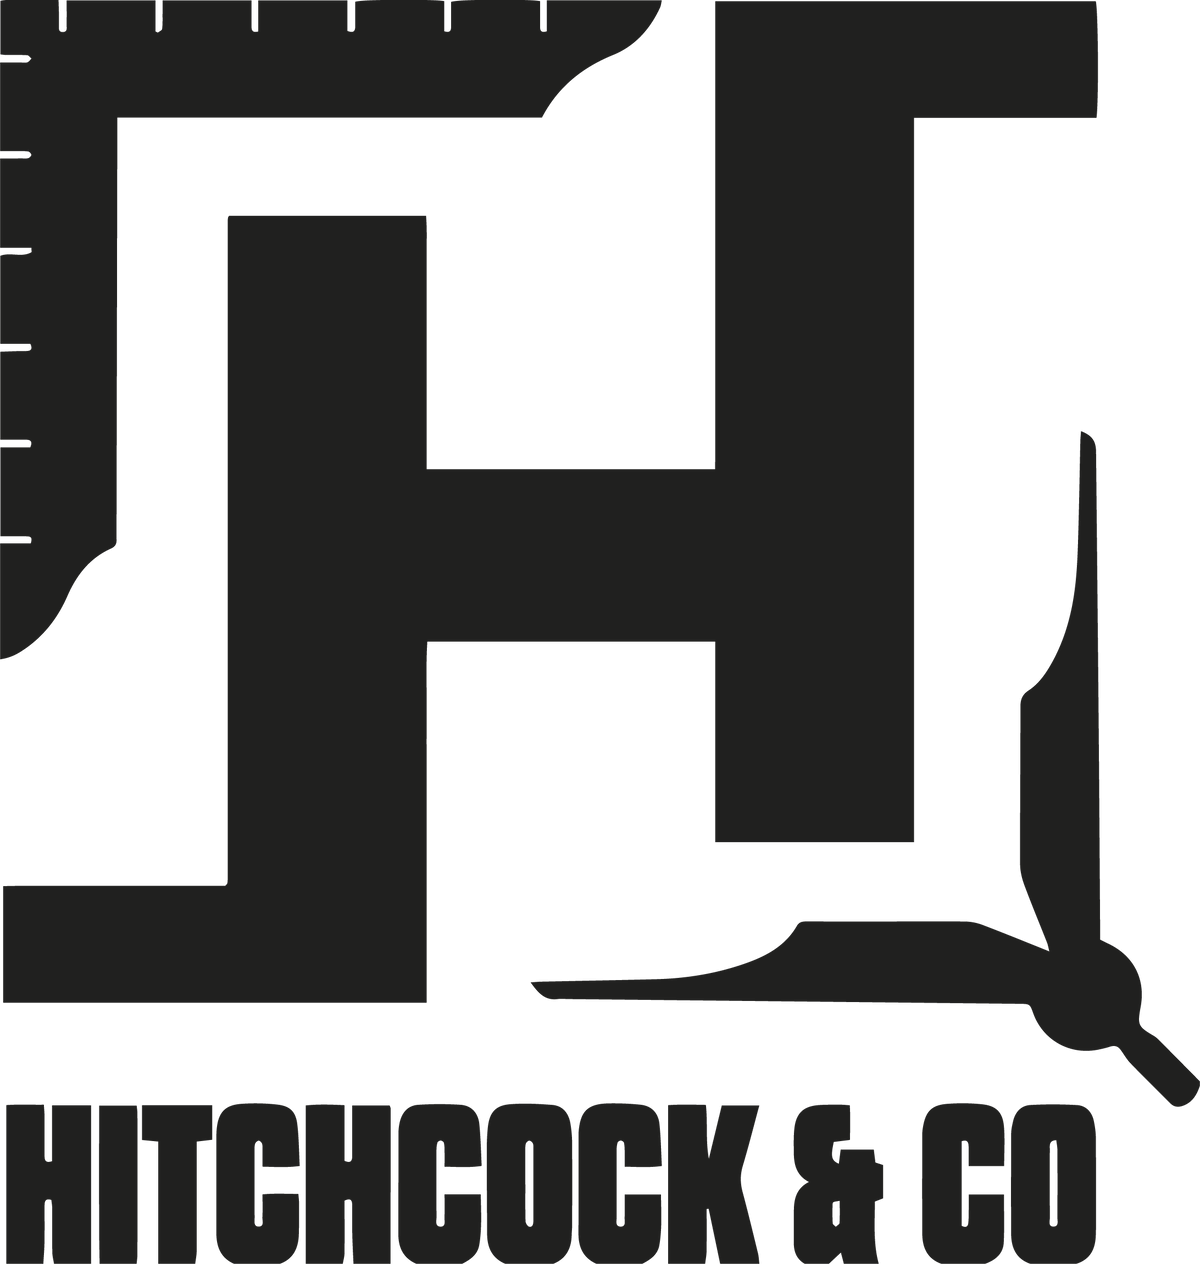 hitch cock and co logo